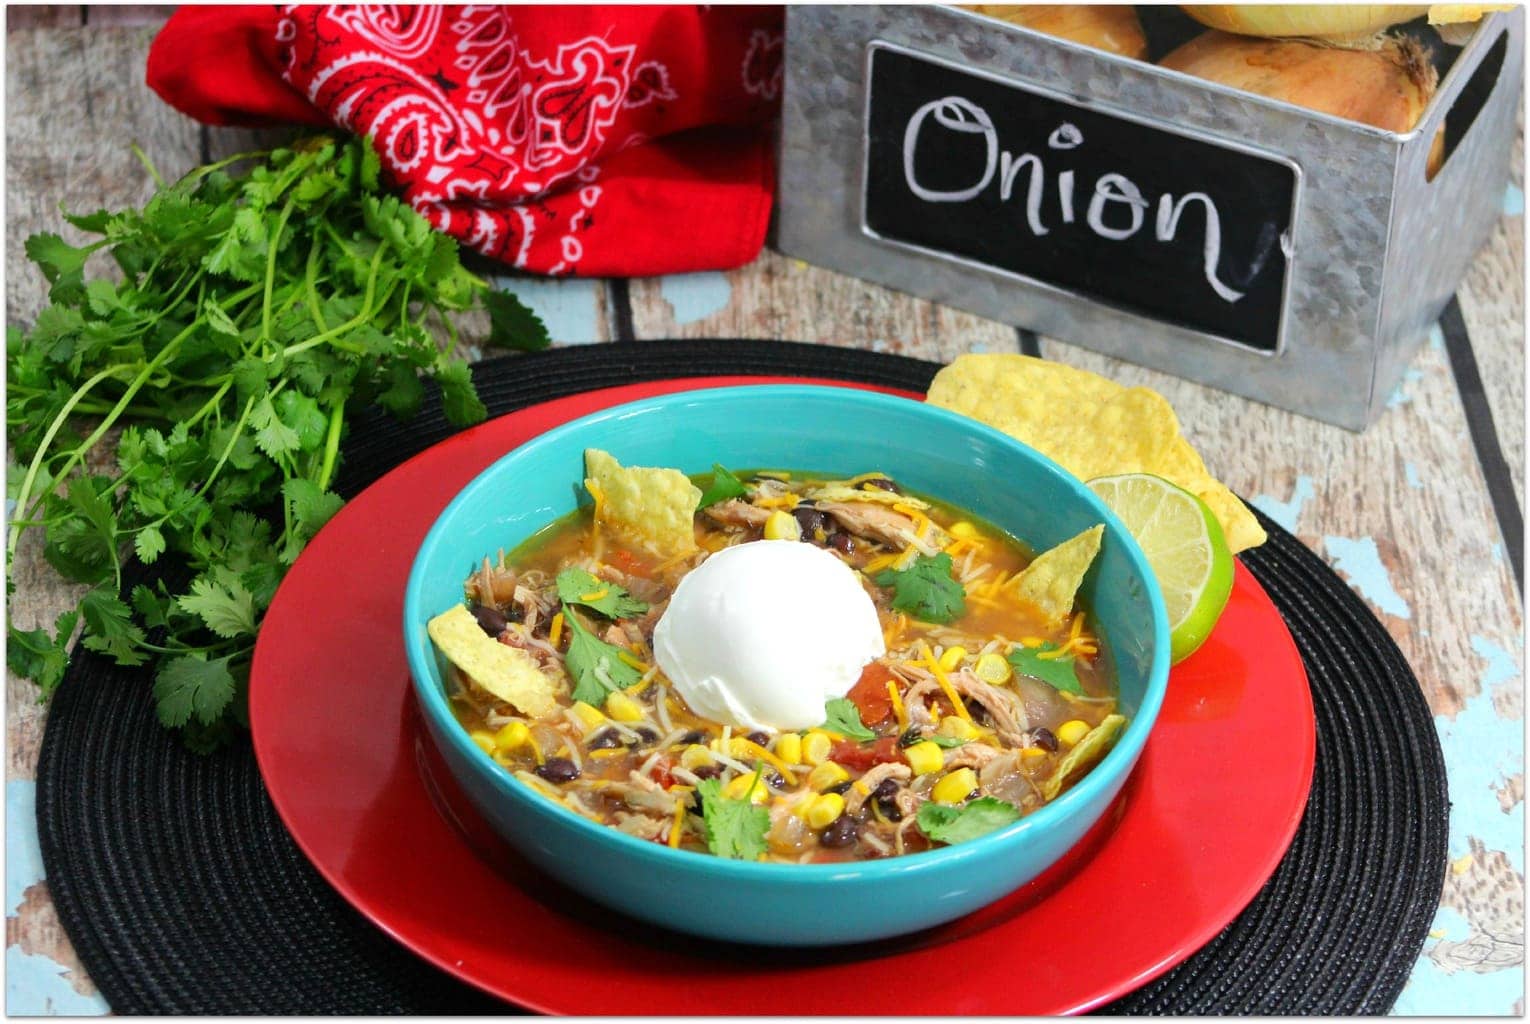 This recipe for Chicken Tortilla Soup is so delicious for a weeknight dinner or a Mexican food party! It's easy to make and won't keep you in the kitchen all day. This will be one of your favorite dinner recipes!